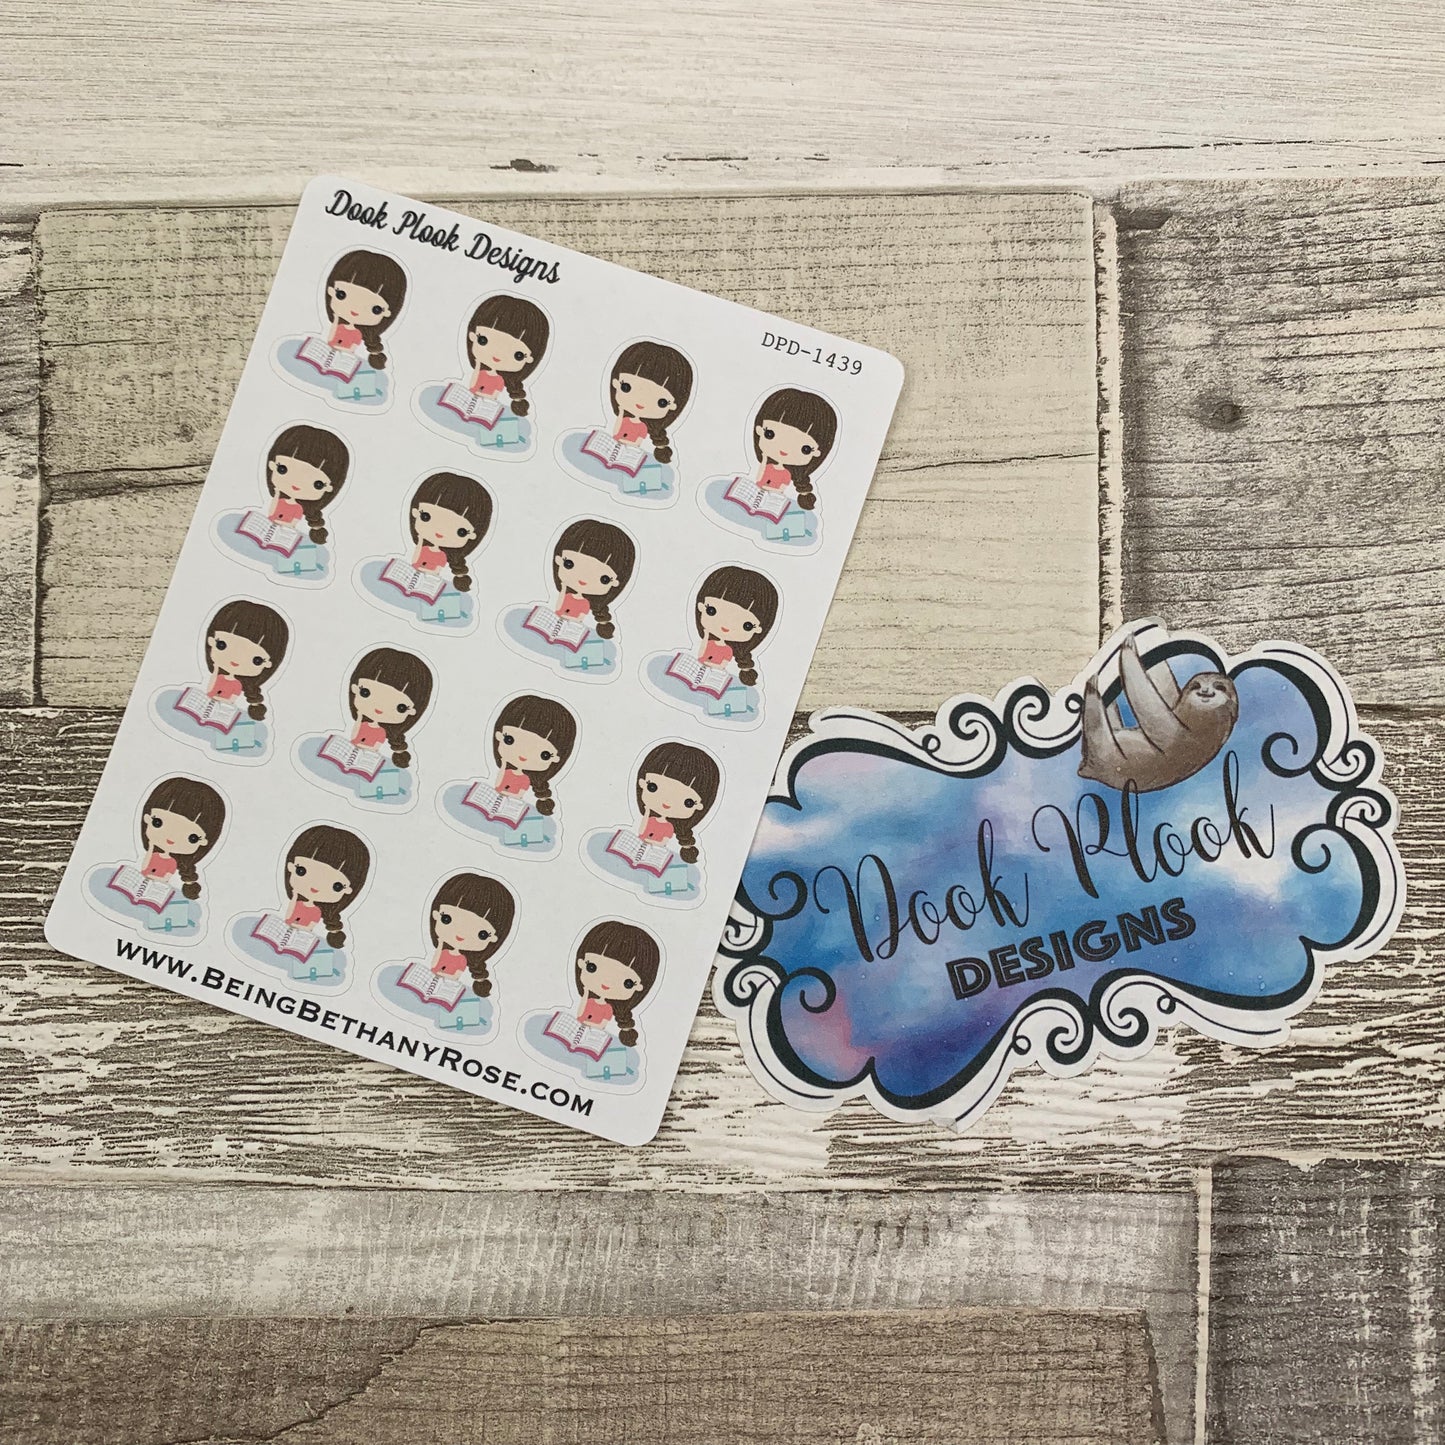 White Woman - Planner Girl Stickers (DPD1439)